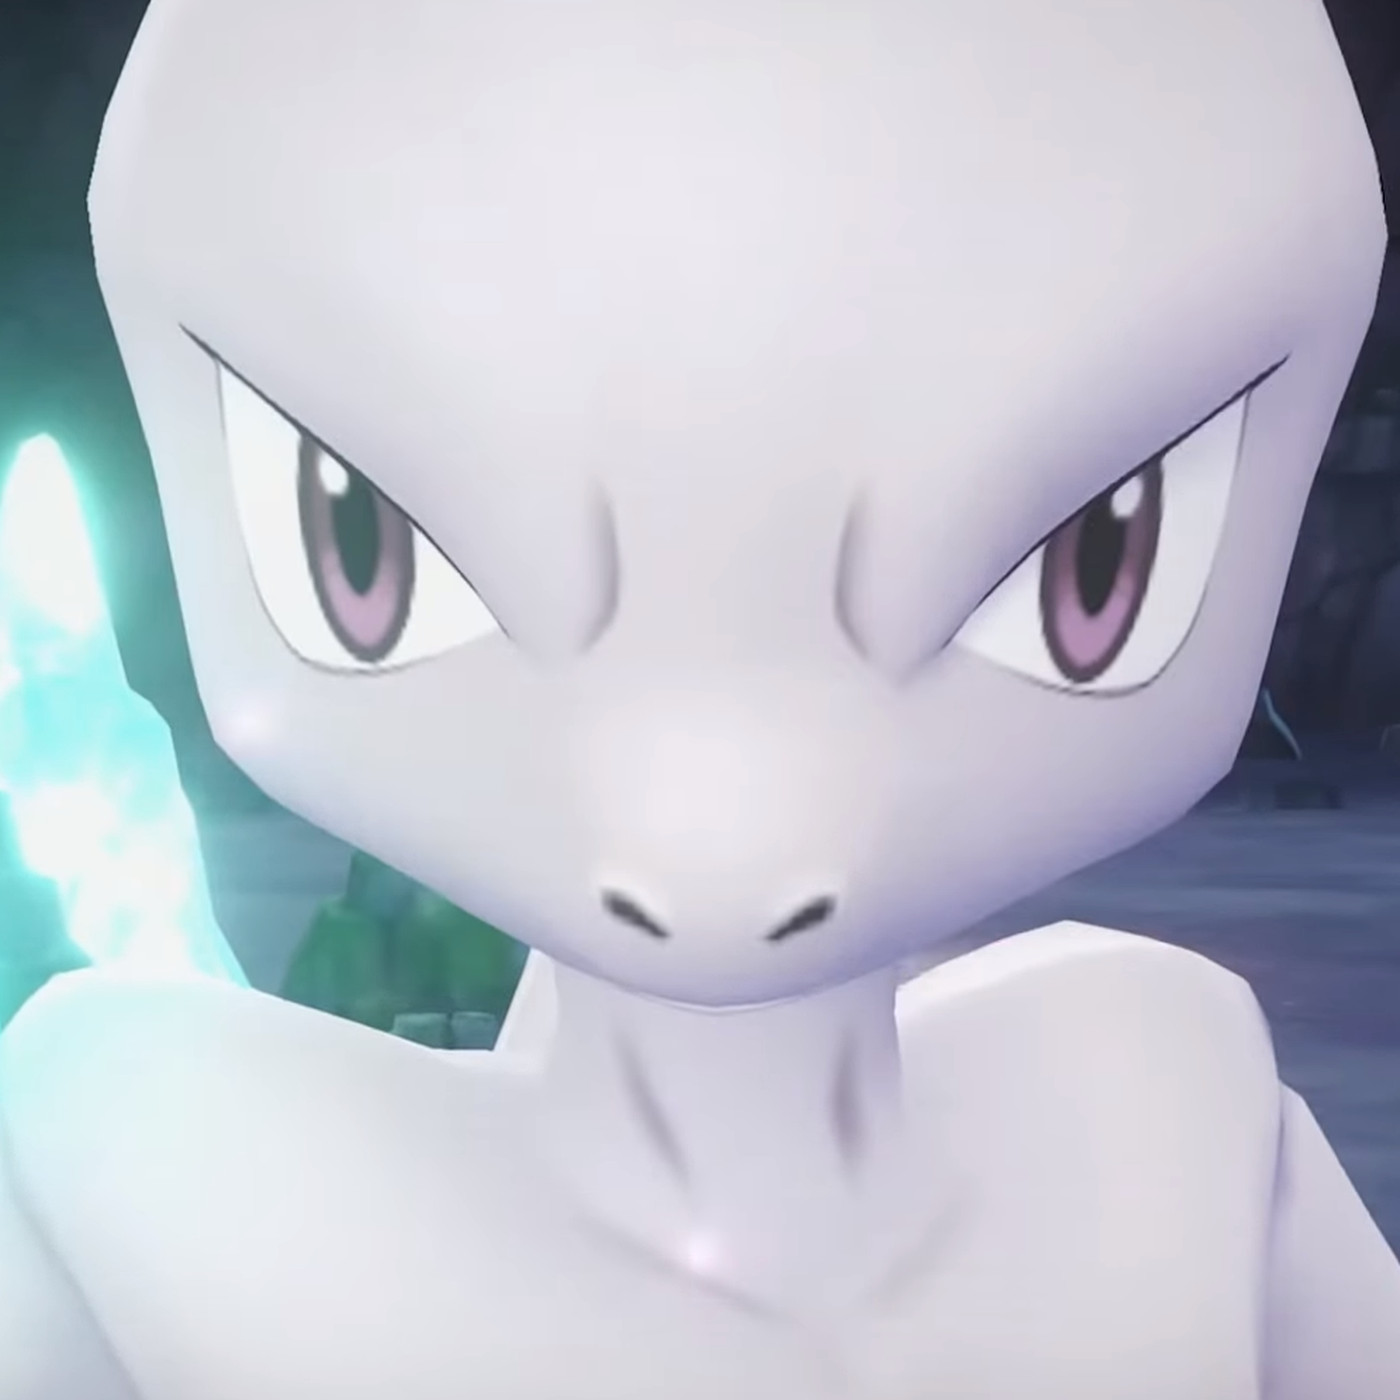 Roblox Project Pokemon Codes For Mewtwo